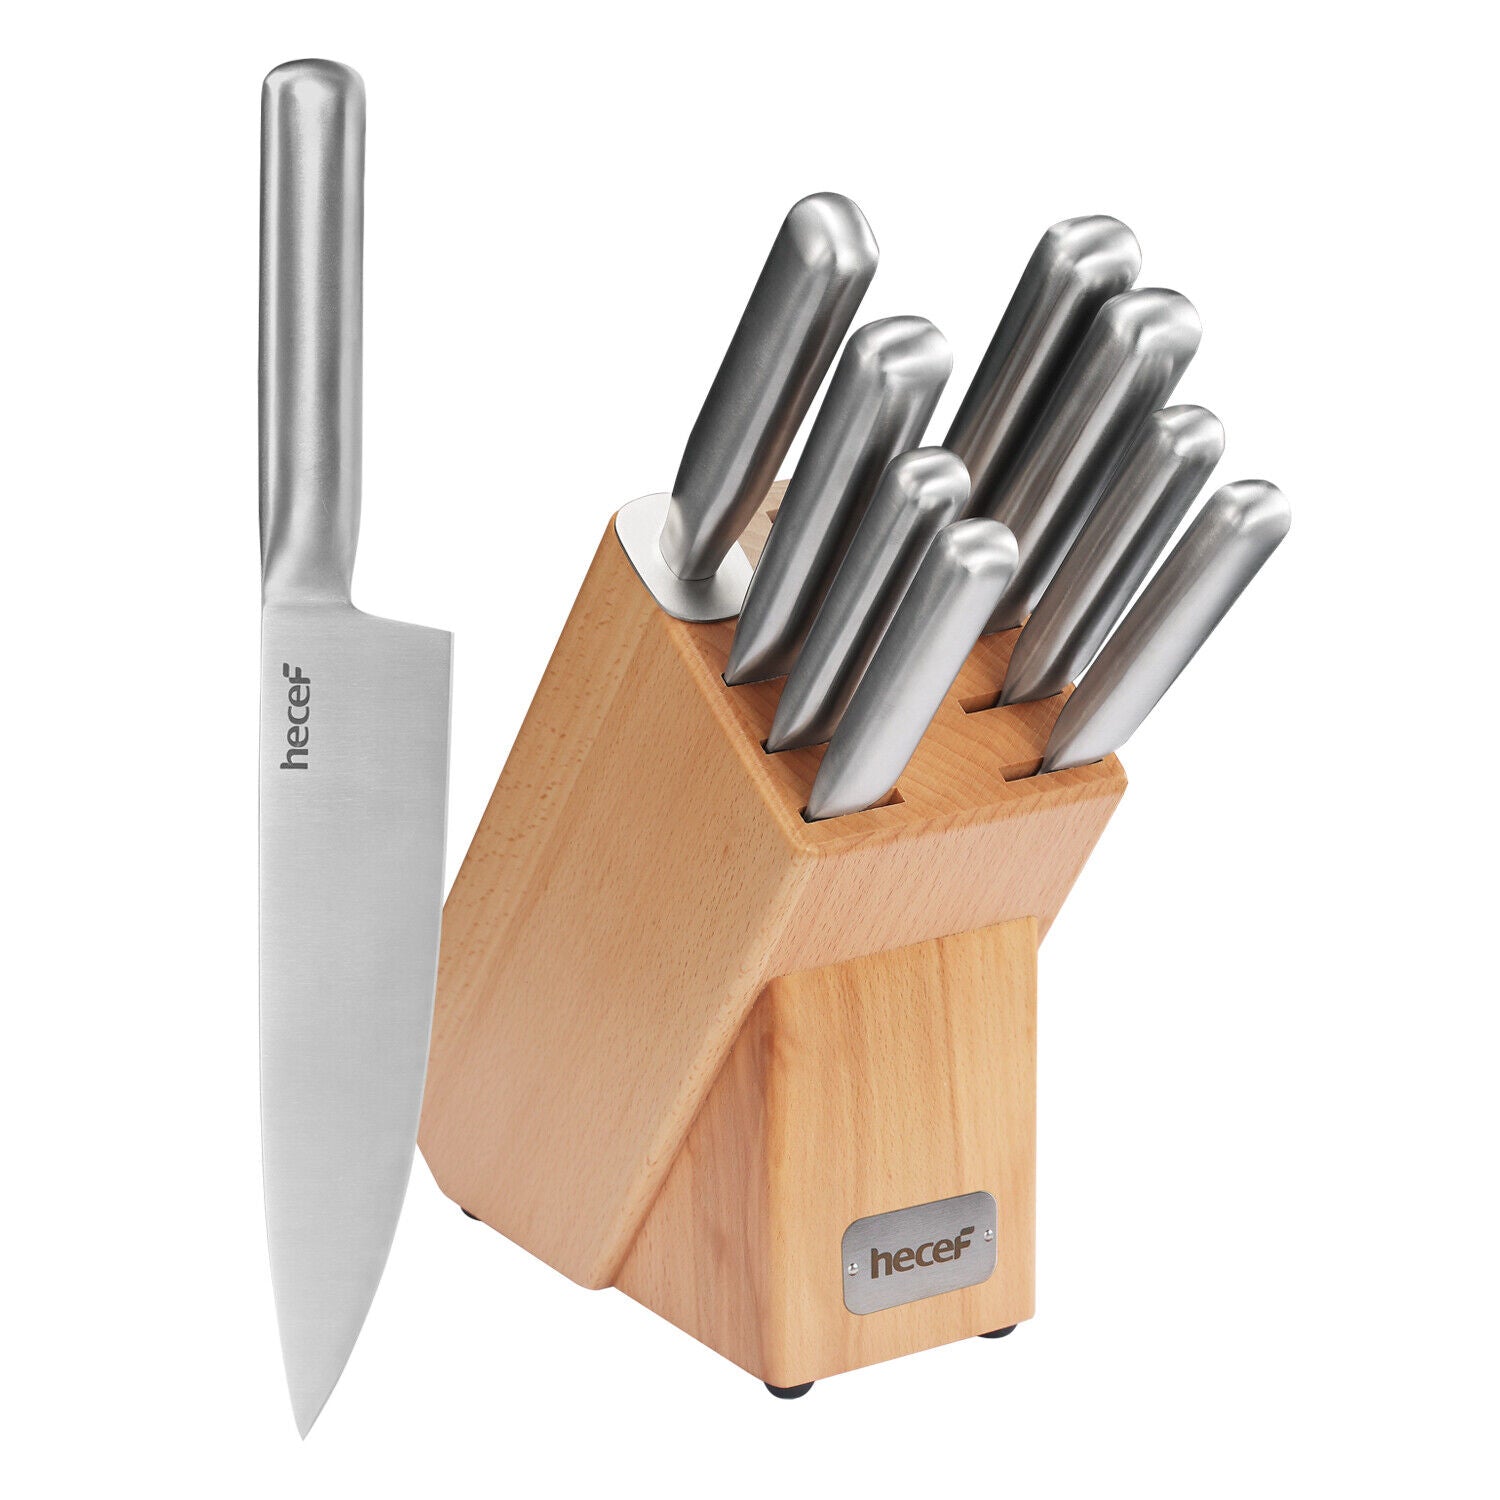 hecef Knife Set of 5 Professional, Ultra Sharp Stainless Steel Marble  Pattern Blade, Kitchen Knives with Ergonomic Handle,Includes Santoku,  Bread, Utility, Pari…